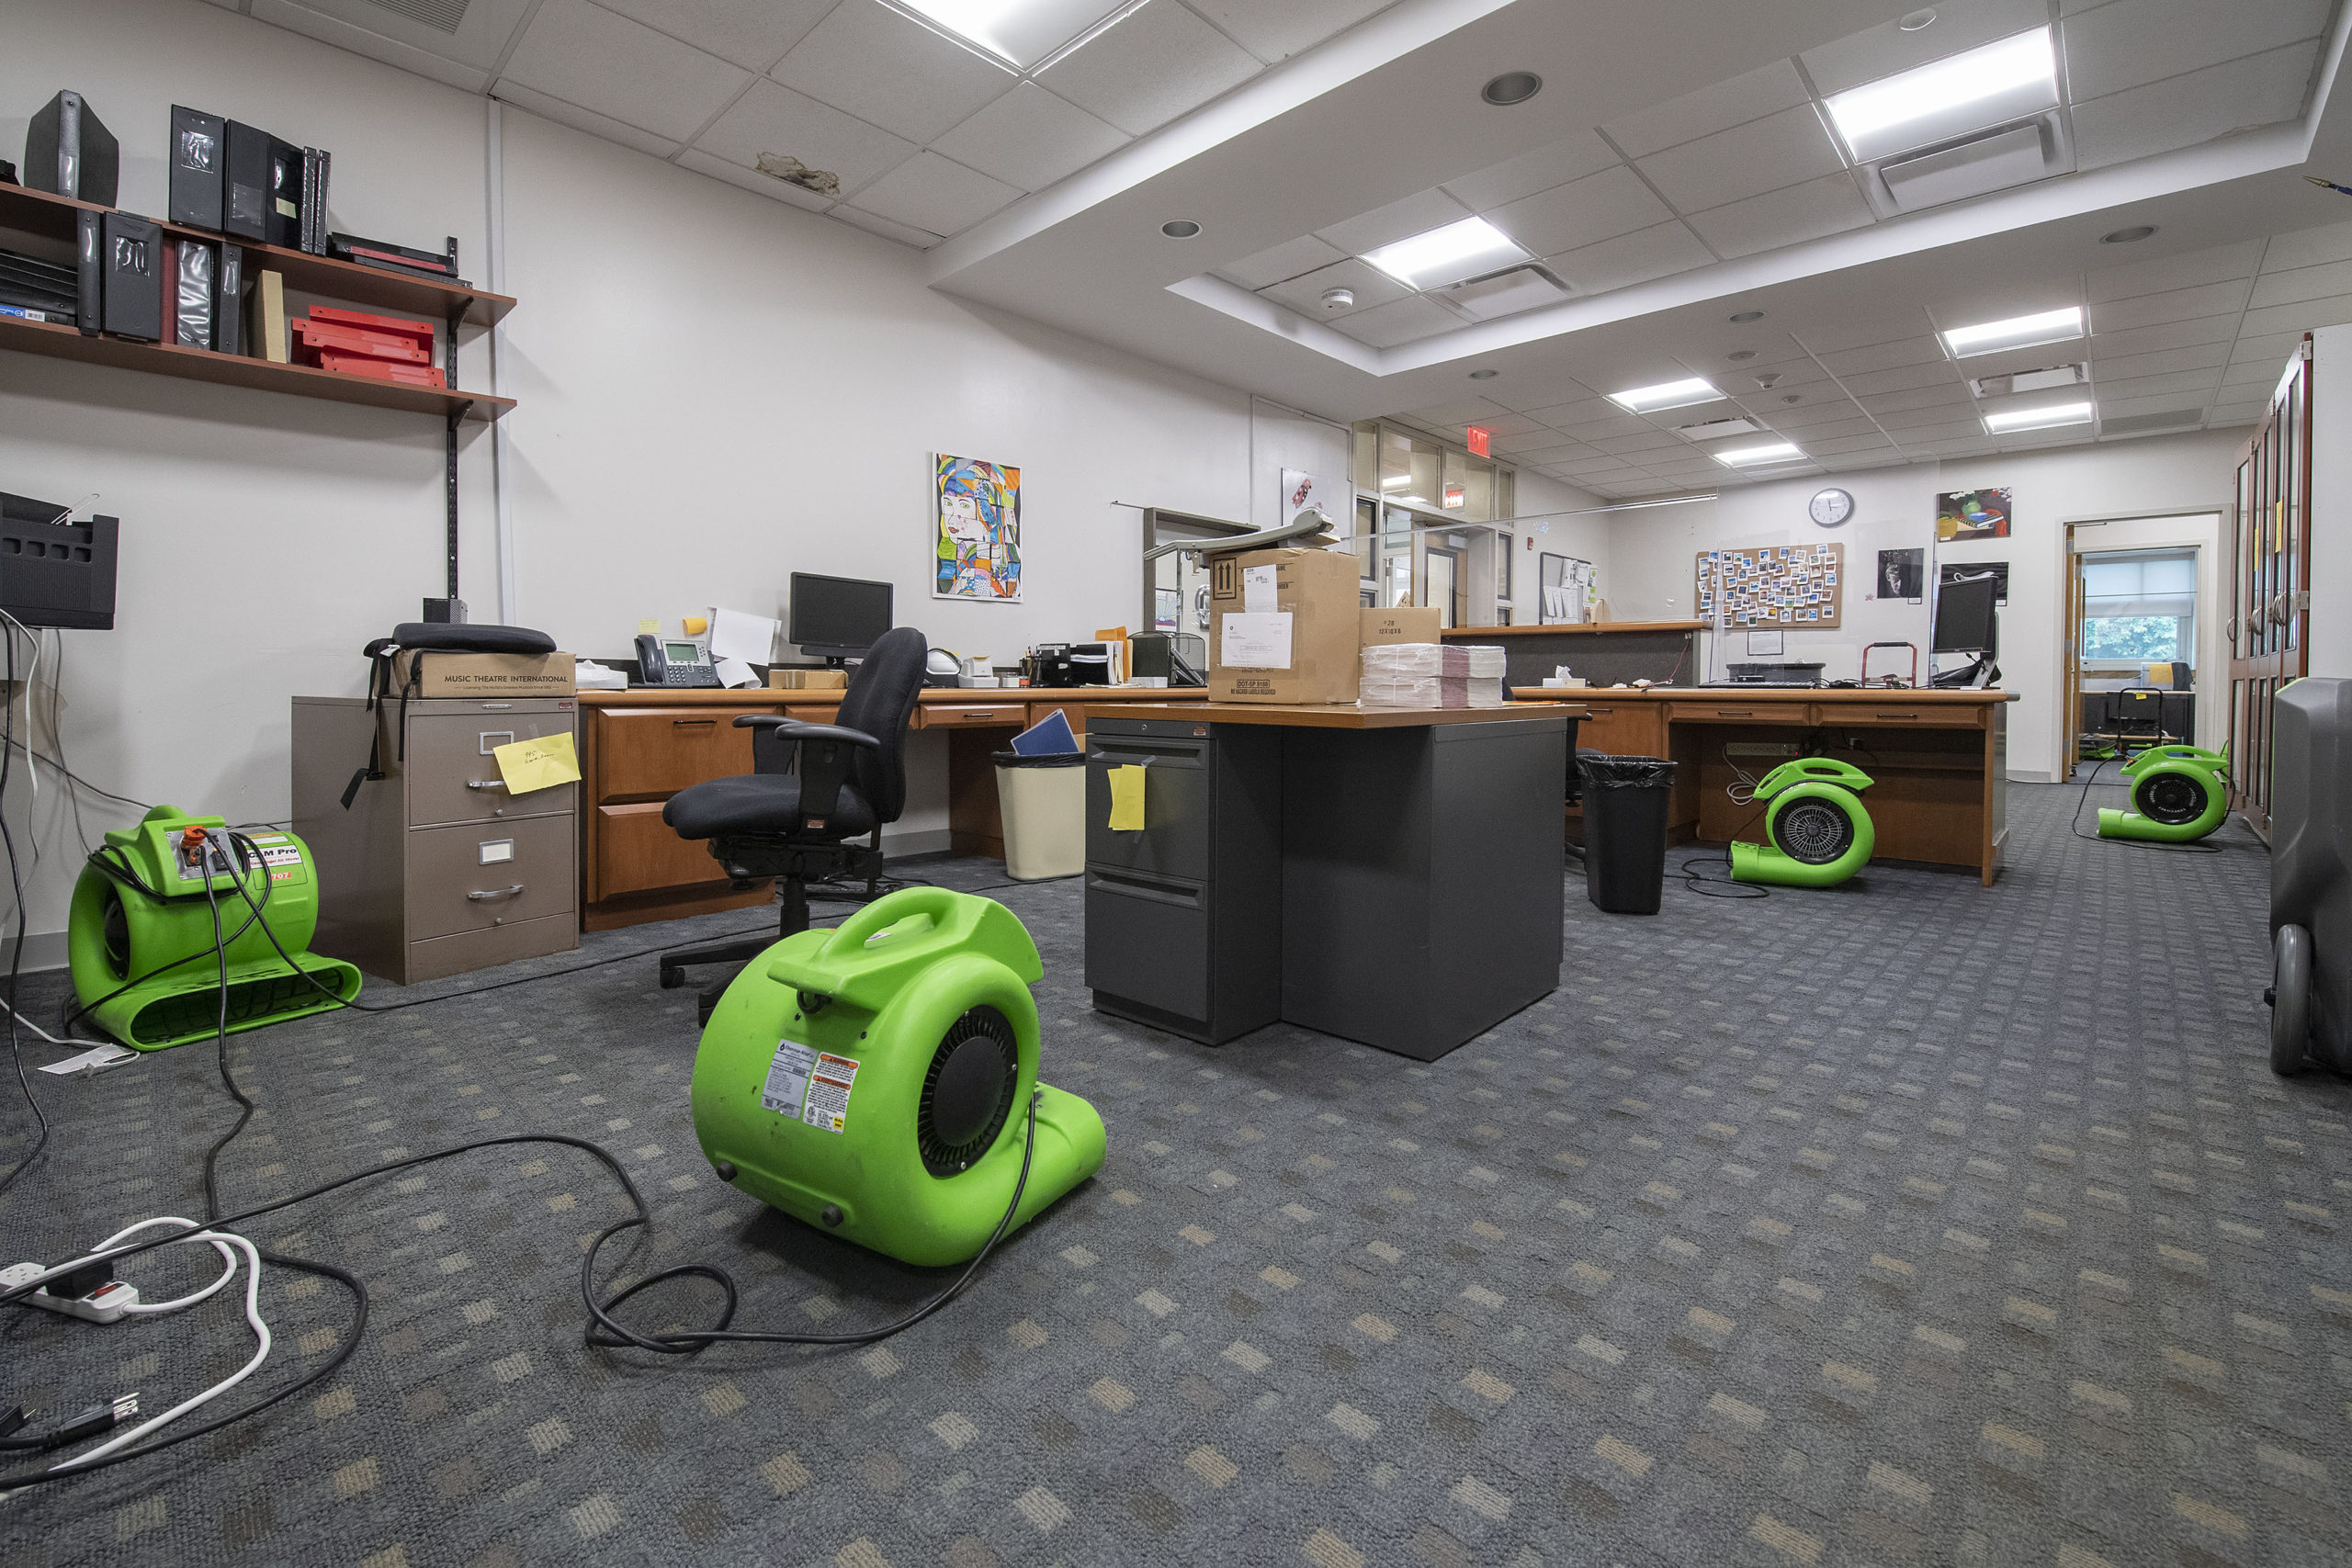 Fans have been placed throughout the East Hampton School District's administrative offices to help dry the carpet, which was flooded when a water pipe burst over the weekend. MICHAEL HELLER